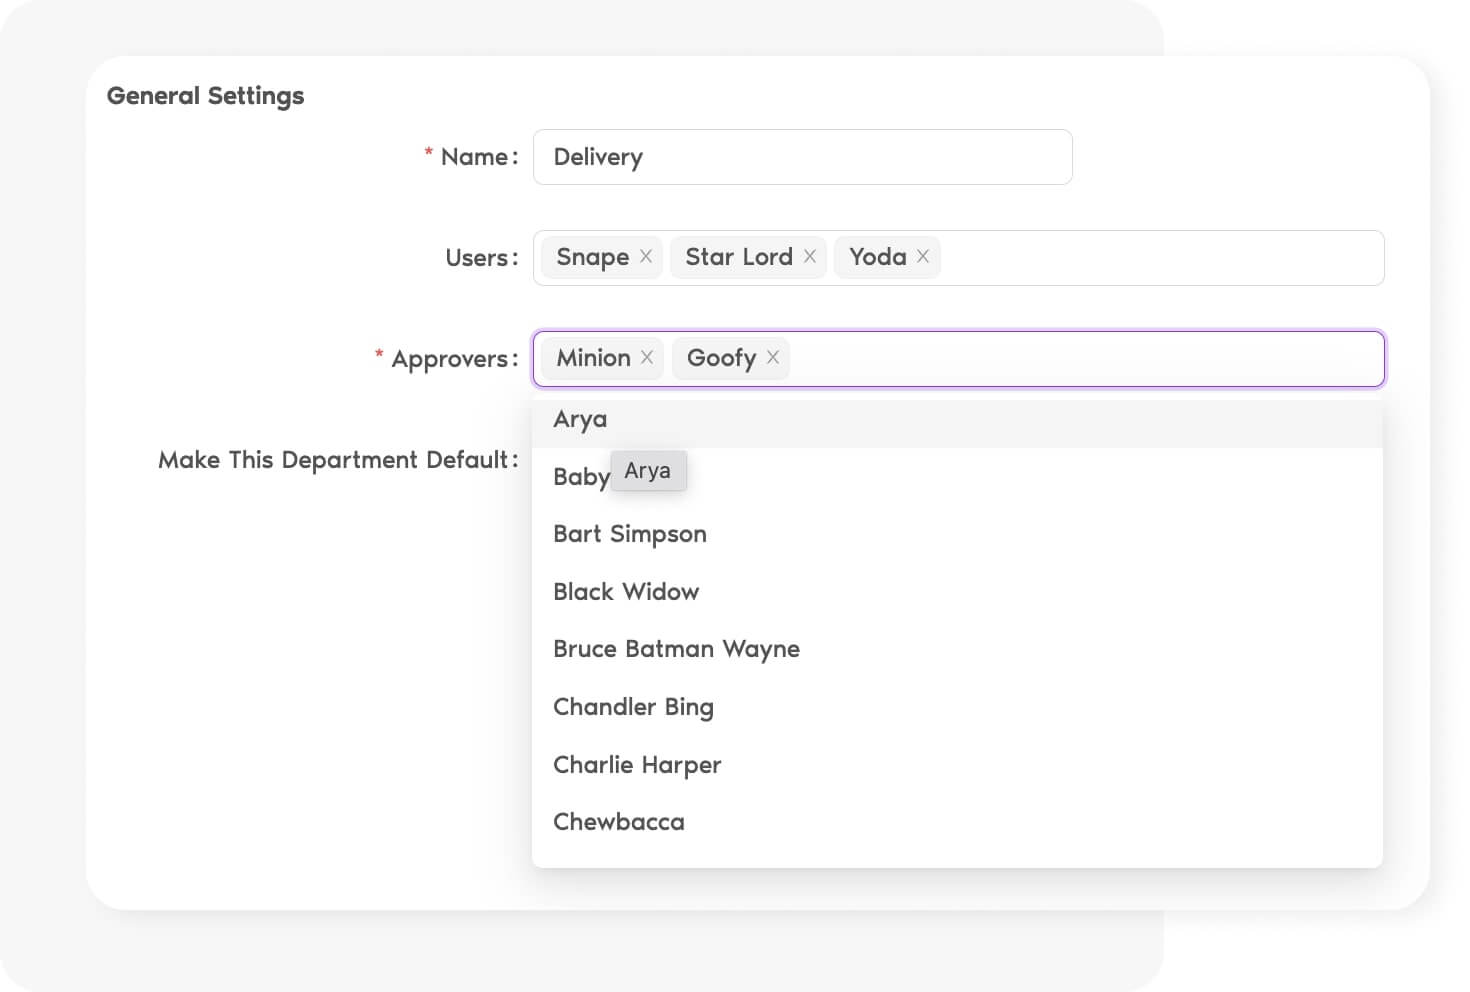 Assign Administrators, Approvers, and Users